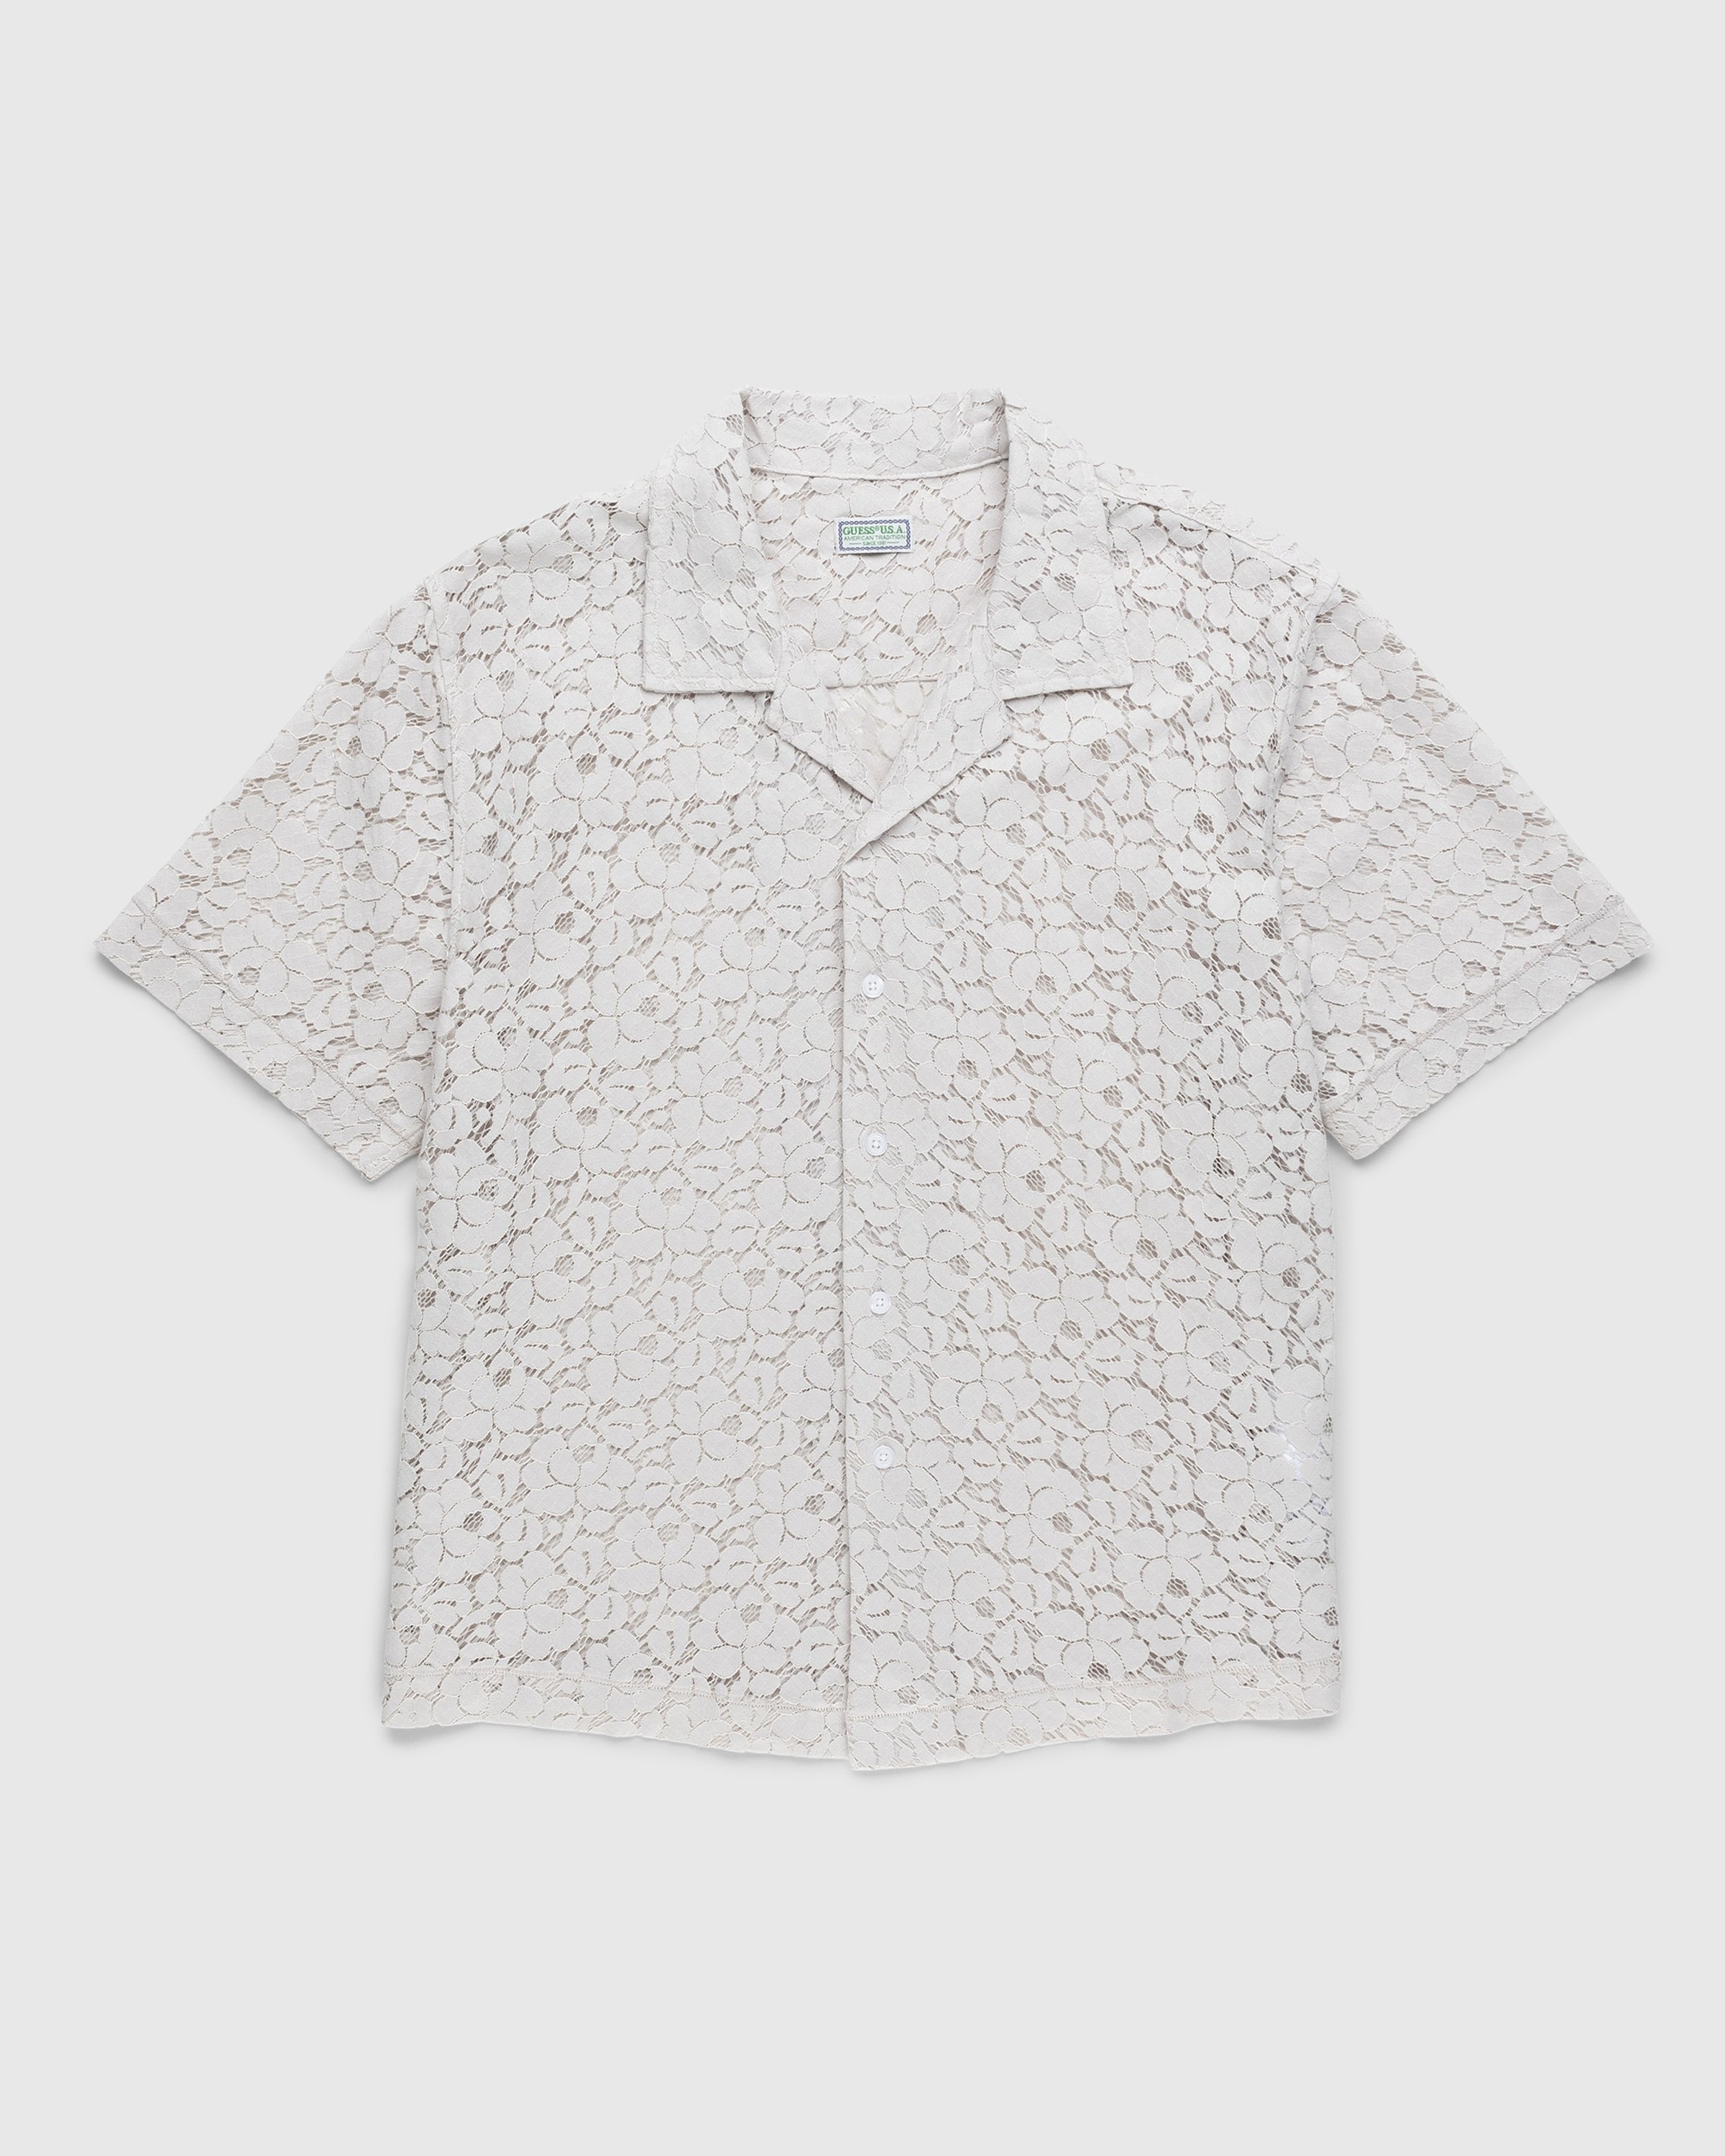 Guess – White Off Highsnobiety Shirt Shop Lace USA Camp |